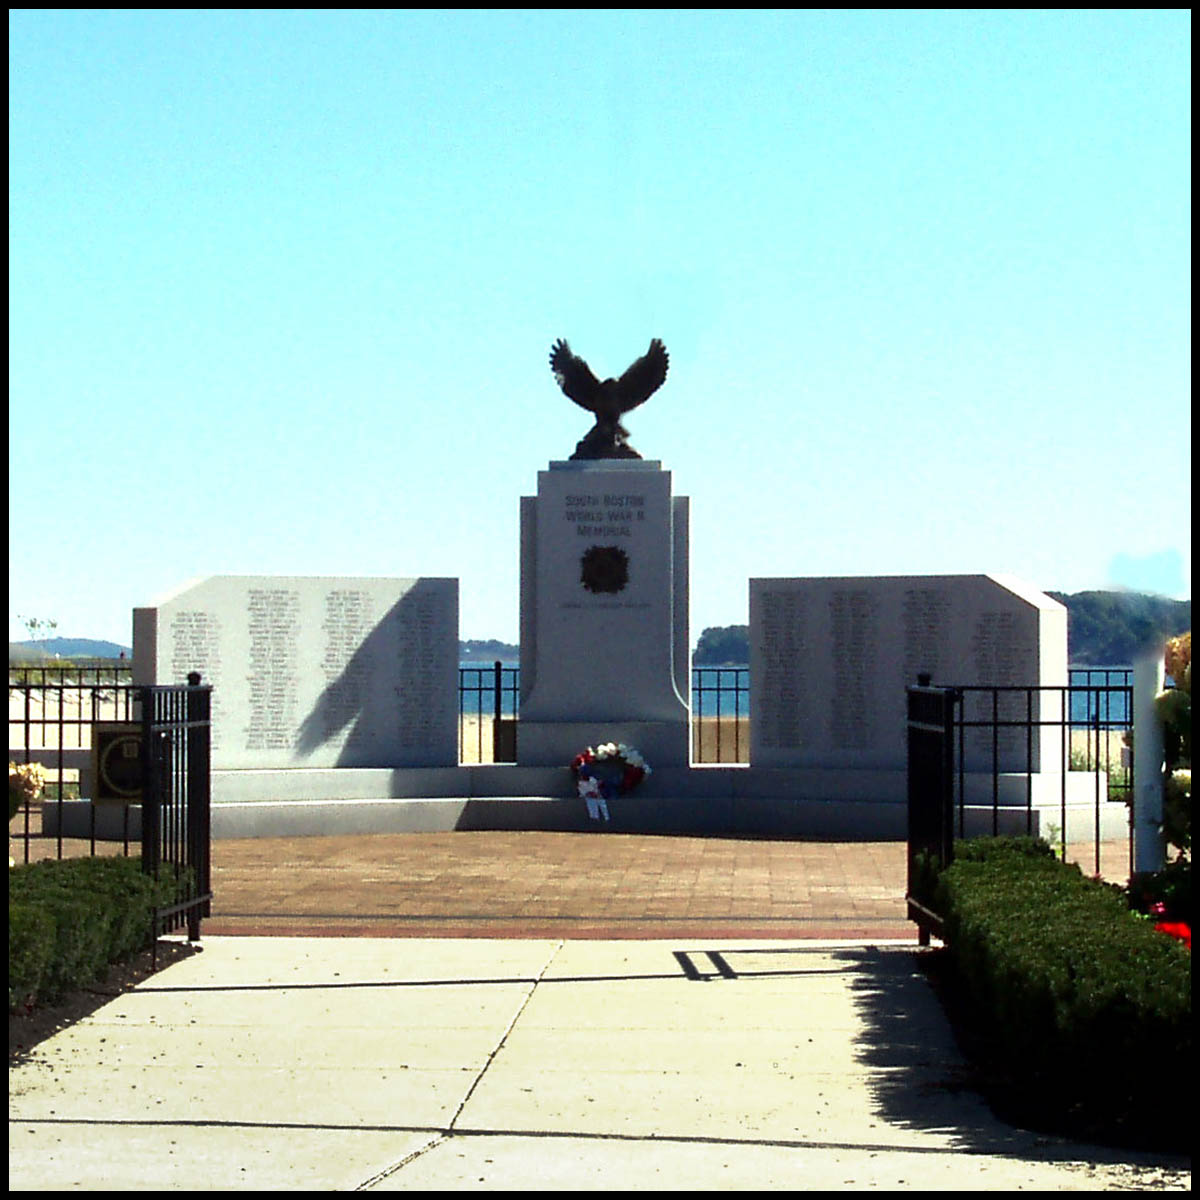 photo of granite monument with bronze eagle sculpture atop central piece in plaza